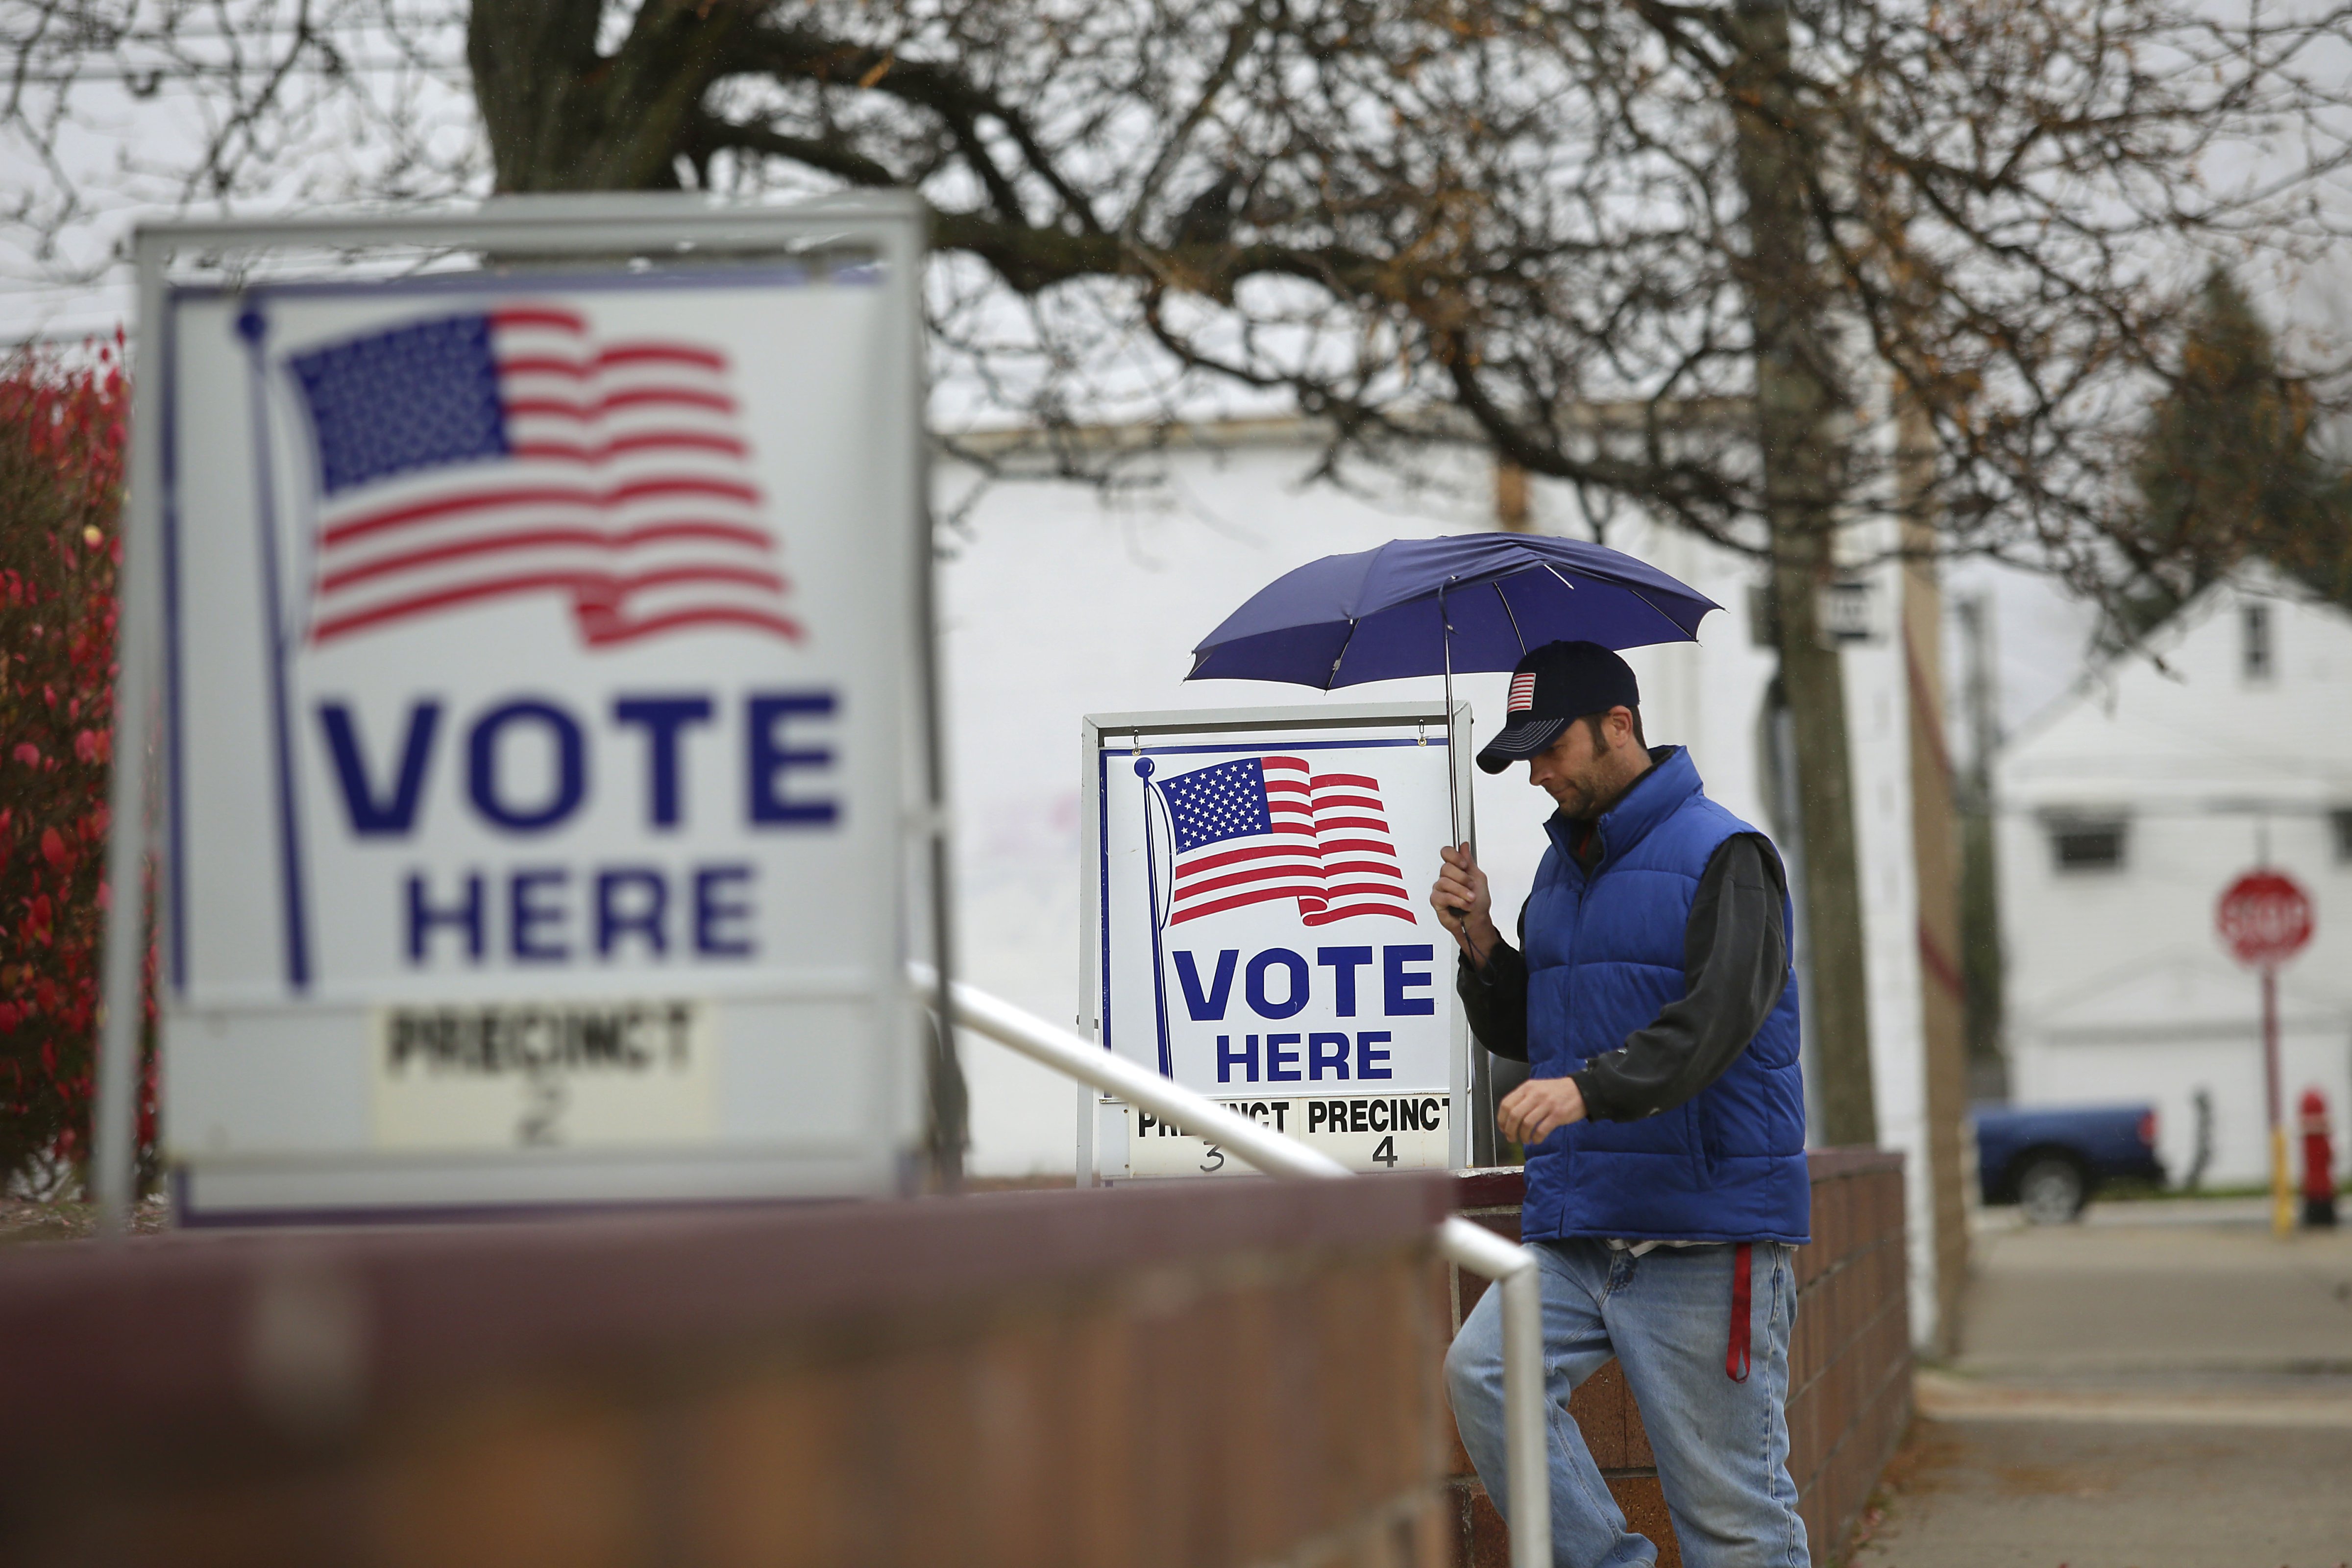 A man fills walks past voting signs displayed outside a polling station during the mid-term elections November 4, 2014 in Hamtramck, Michigan. (Joshua Lott—Getty Images)